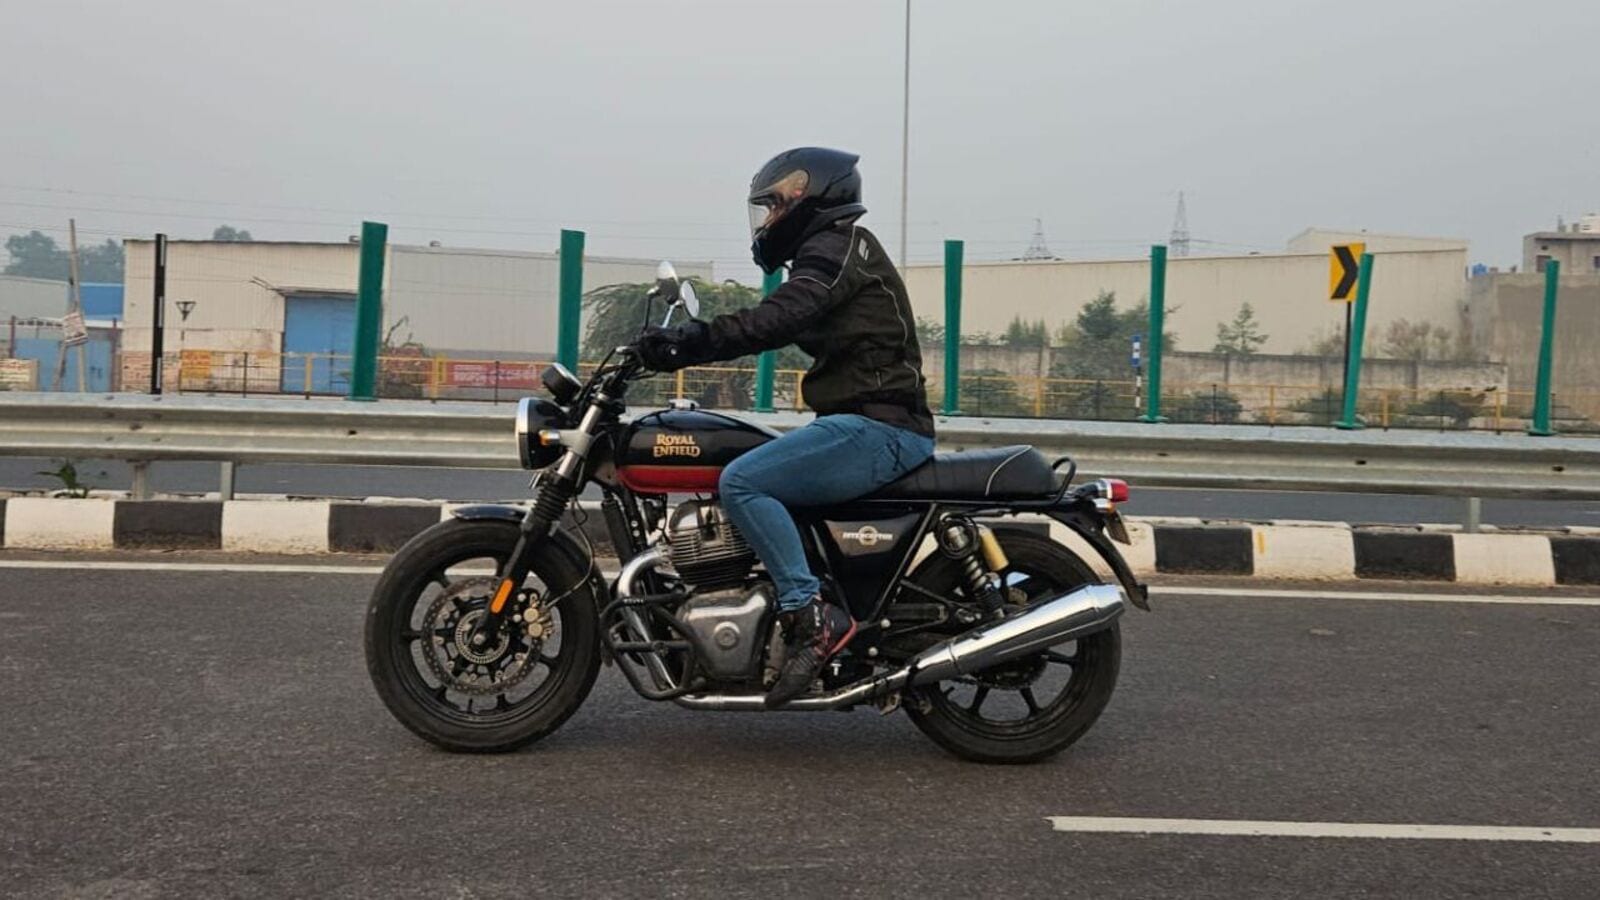 ROYAL ENFIELD Streetwind V3 Riding Protective Jacket Price in India - Buy ROYAL  ENFIELD Streetwind V3 Riding Protective Jacket online at Flipkart.com